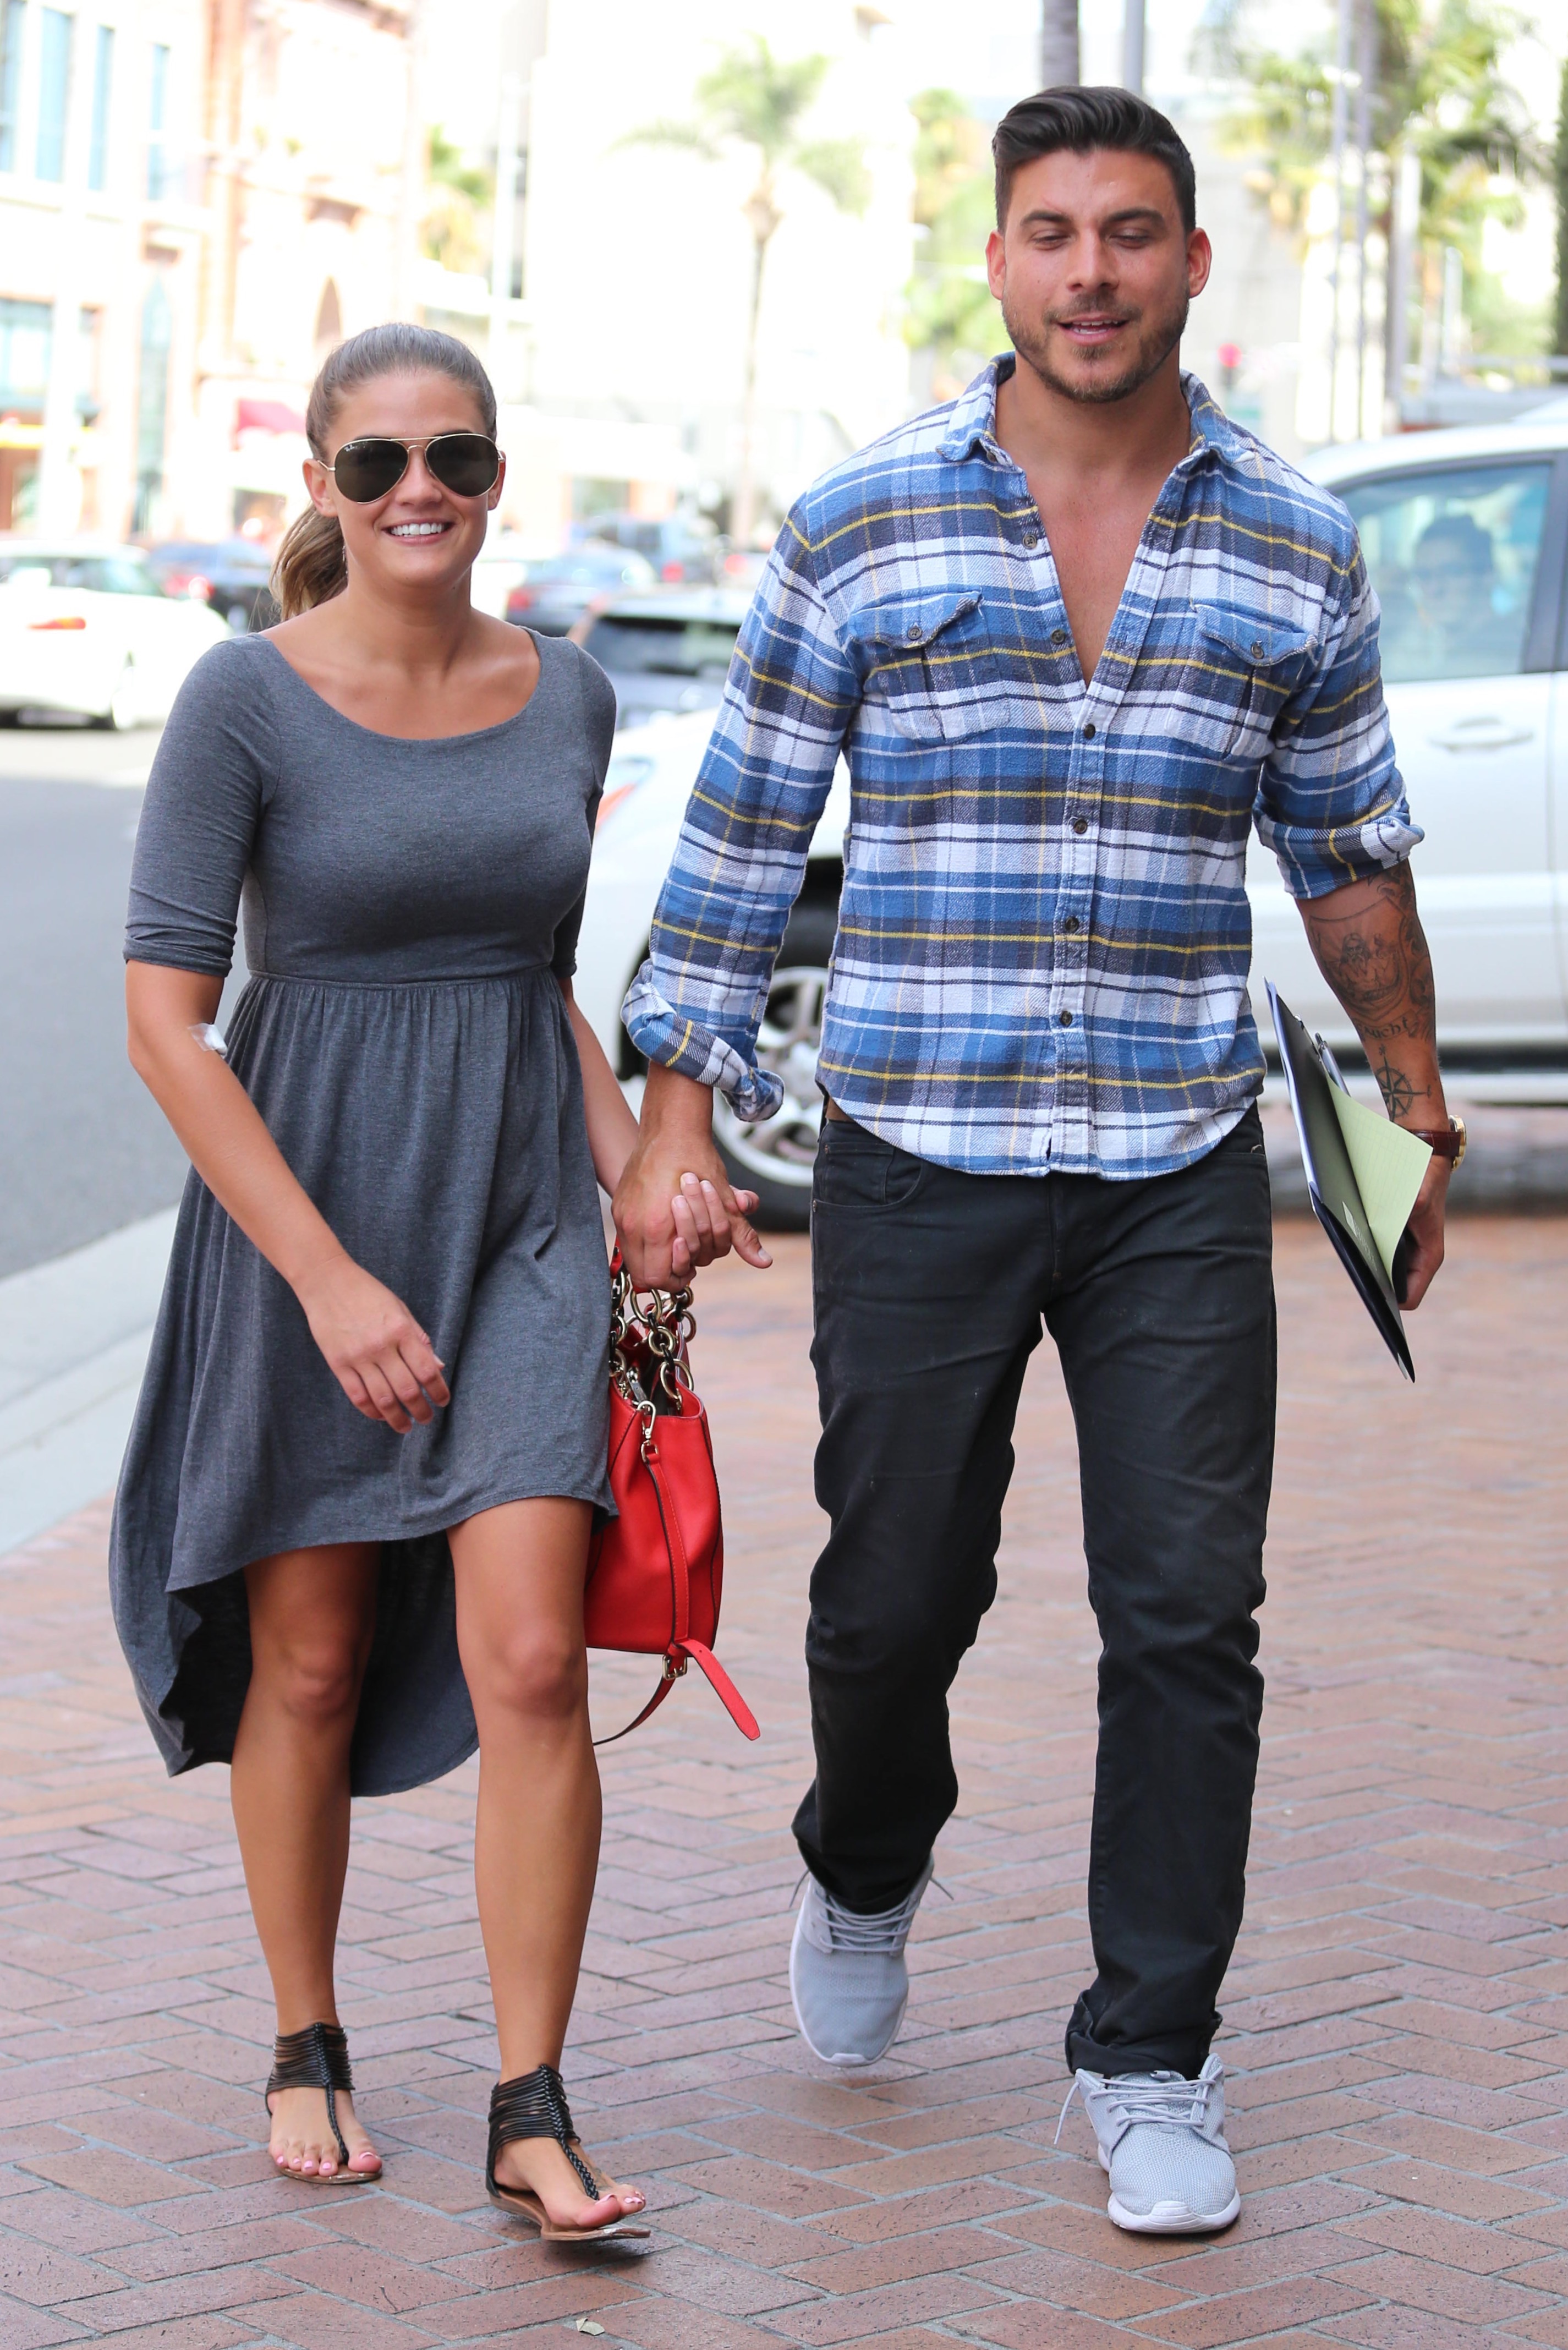 A throwback photo showing Jax Taylor and girlfriend, Carmen Dickman, taking a casual stroll on a sunny day.